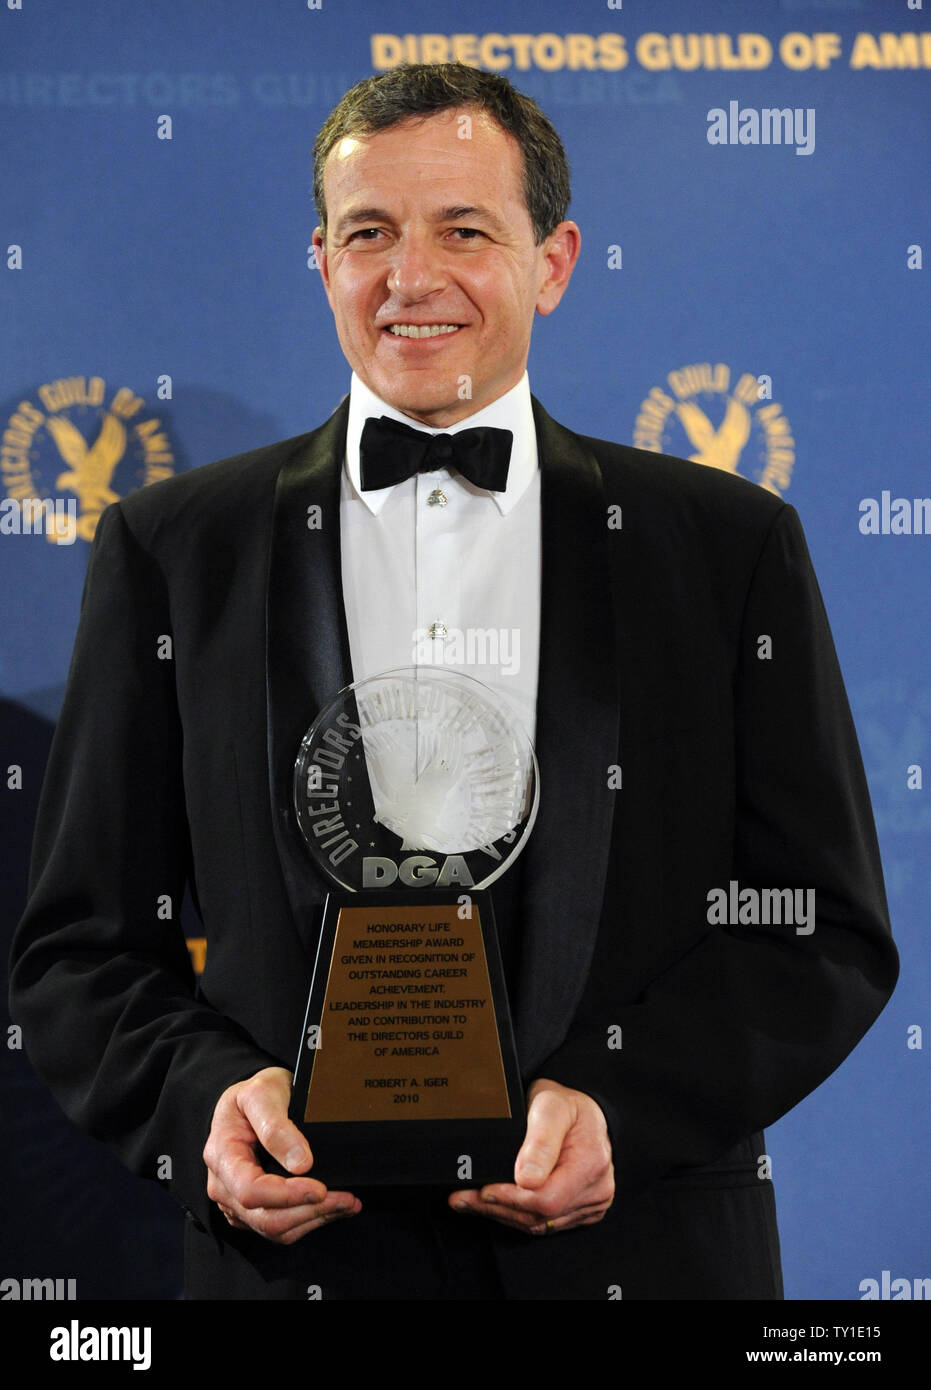 Walt Disney Company President and CEO Bob Iger holds his Honorary Life Membership award at the 62nd Annual Directors Guild of America Awards in Los Angeles on January 30, 2010.  UPI/Jim Ruymen. Stock Photo